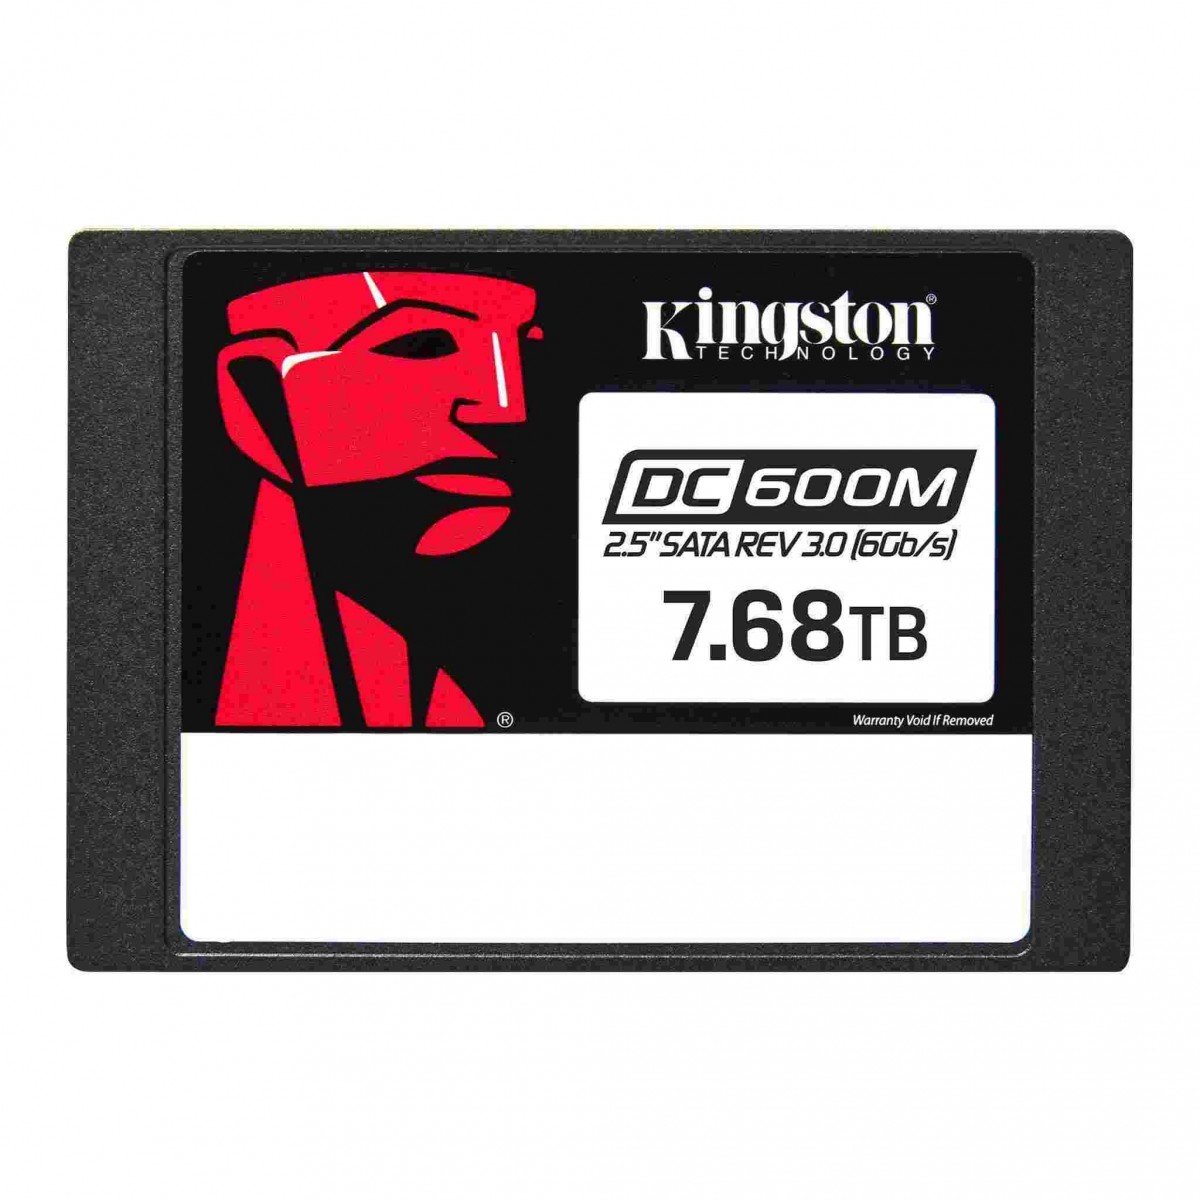 Kingston 7.68TB DC600M 2.5inch SATA3 SSD - Solid State Disk - 2.5